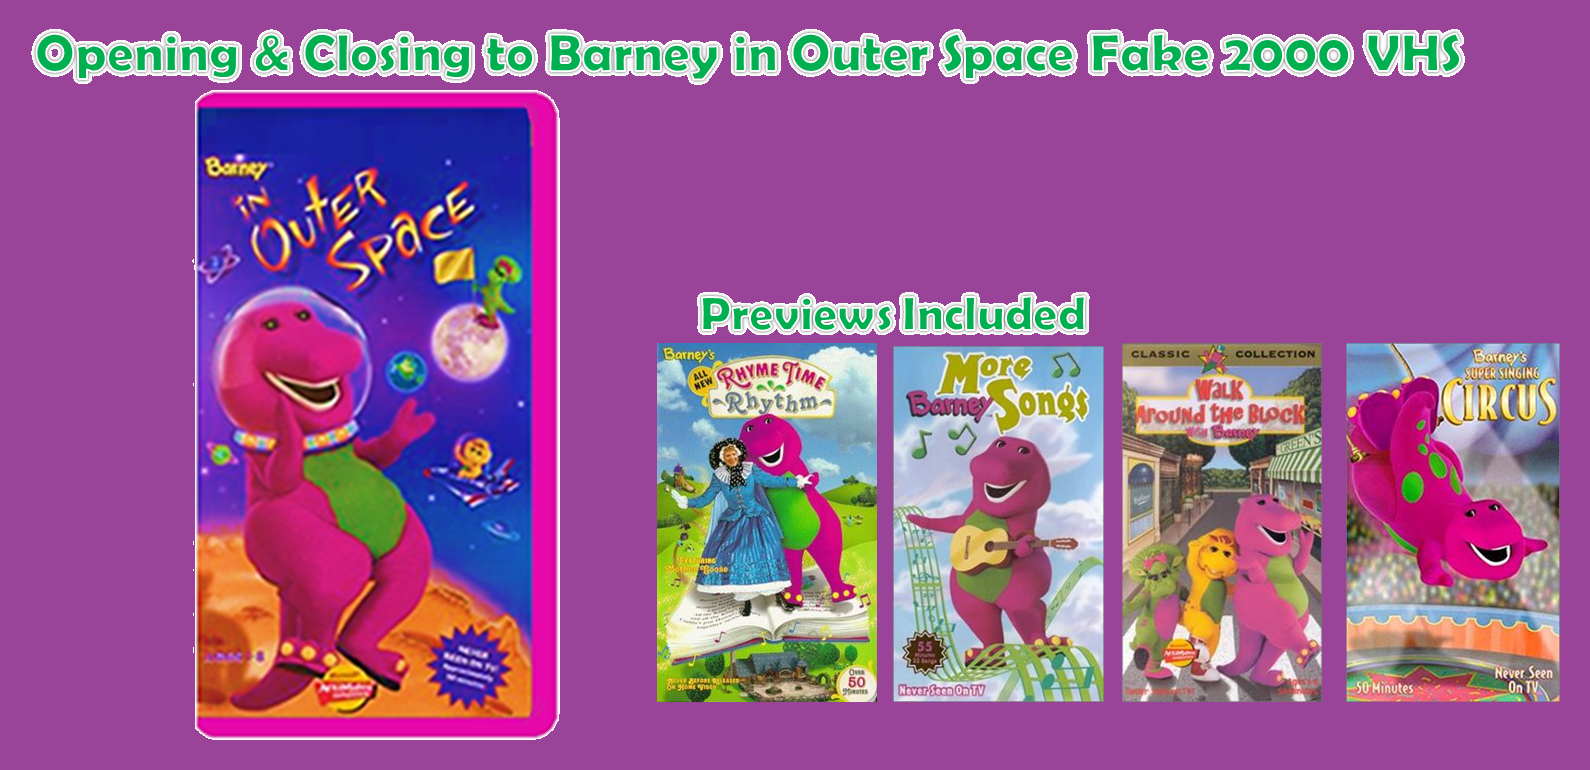 Image Opening And Closing To Barney In Outer Space Fake 2000 VHS